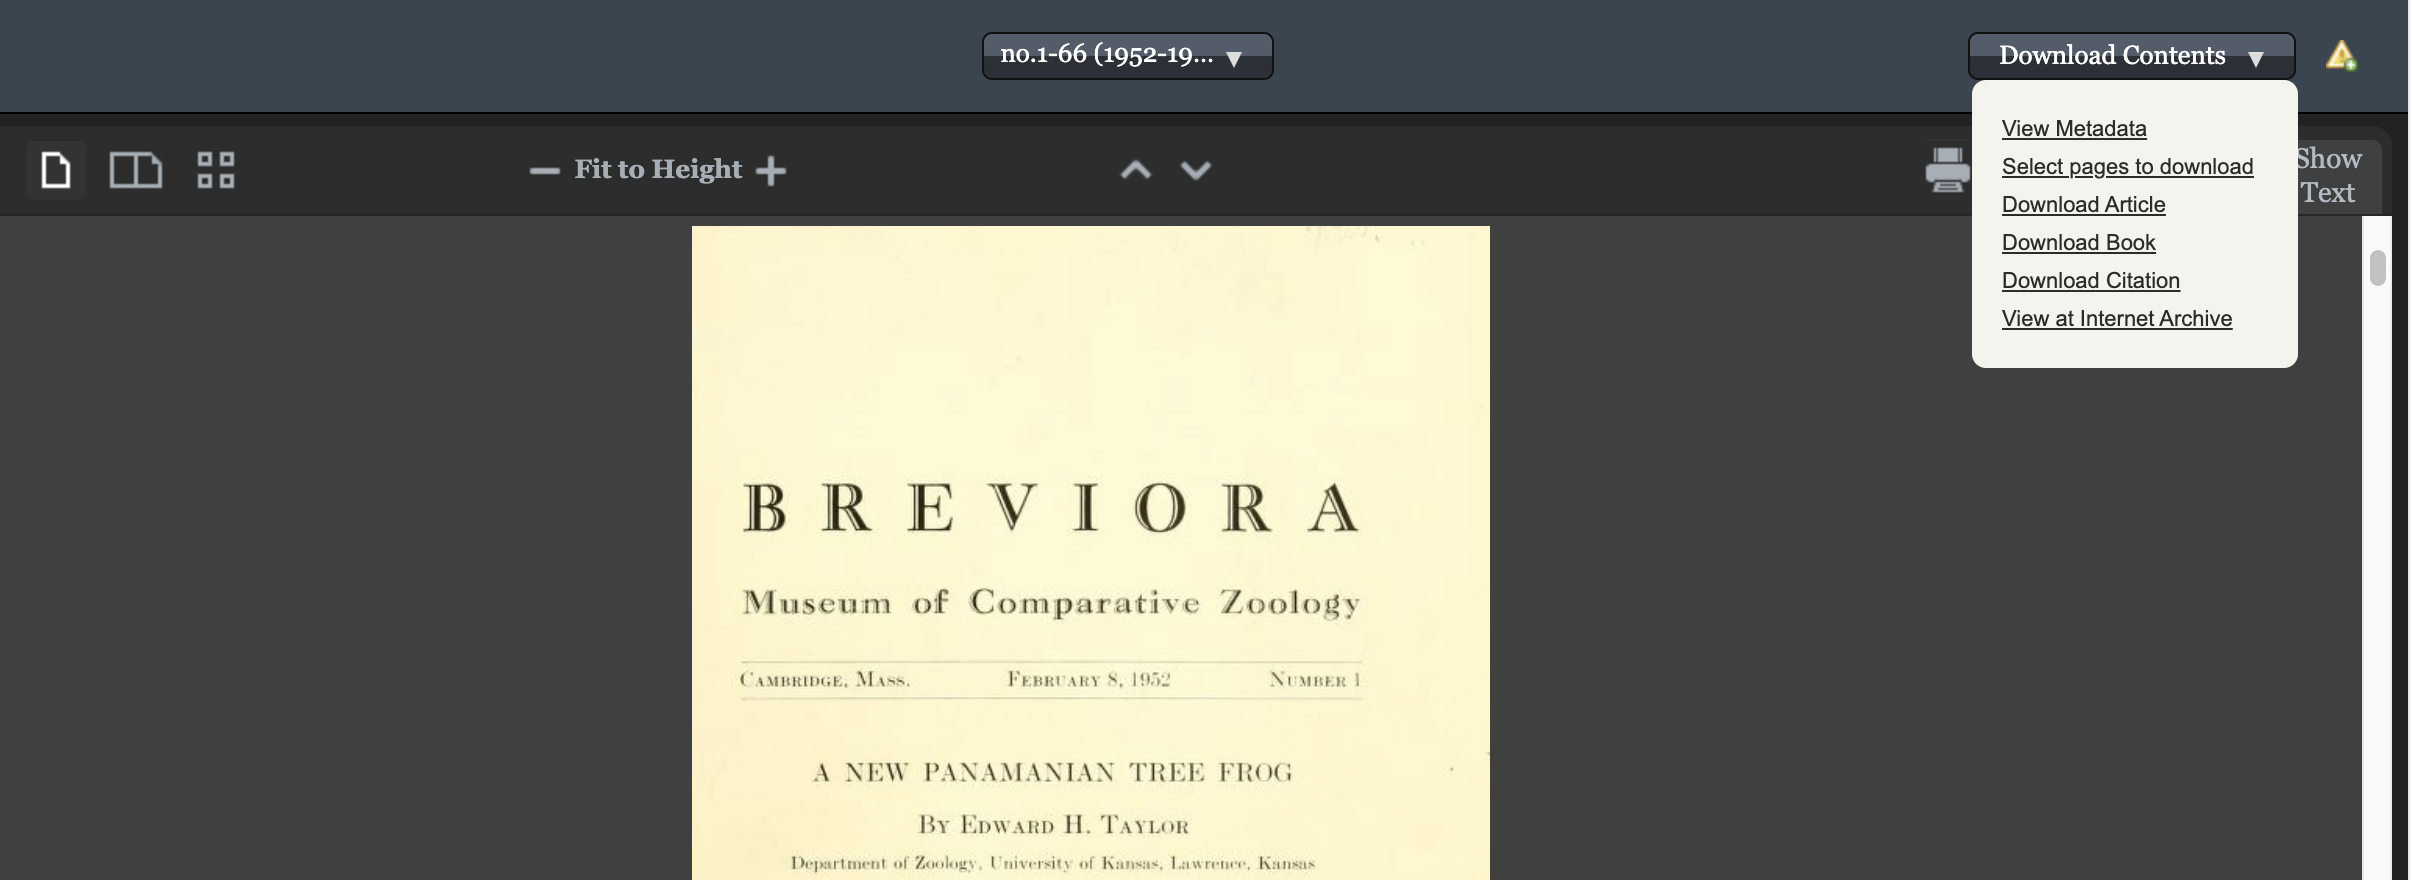 Screenshot of the Biodiversity Heritage Library book viewer showing options in the download contents dropdown menu.